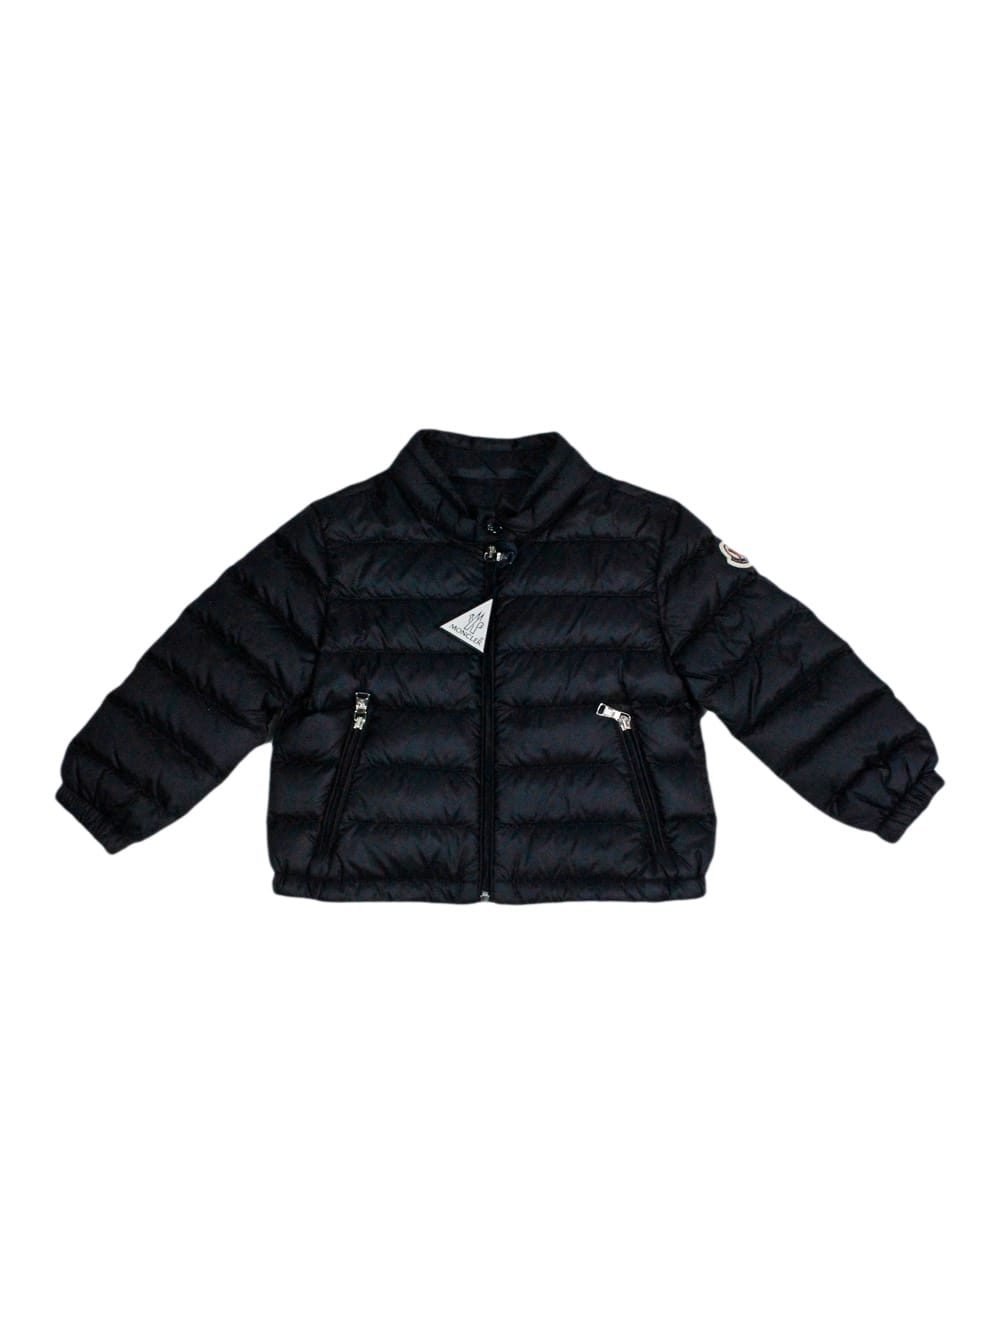 Shop Moncler Acorus 100 Gram Down Jacket With Zip Closure And Elasticated Cuffs And Bottom In Blu